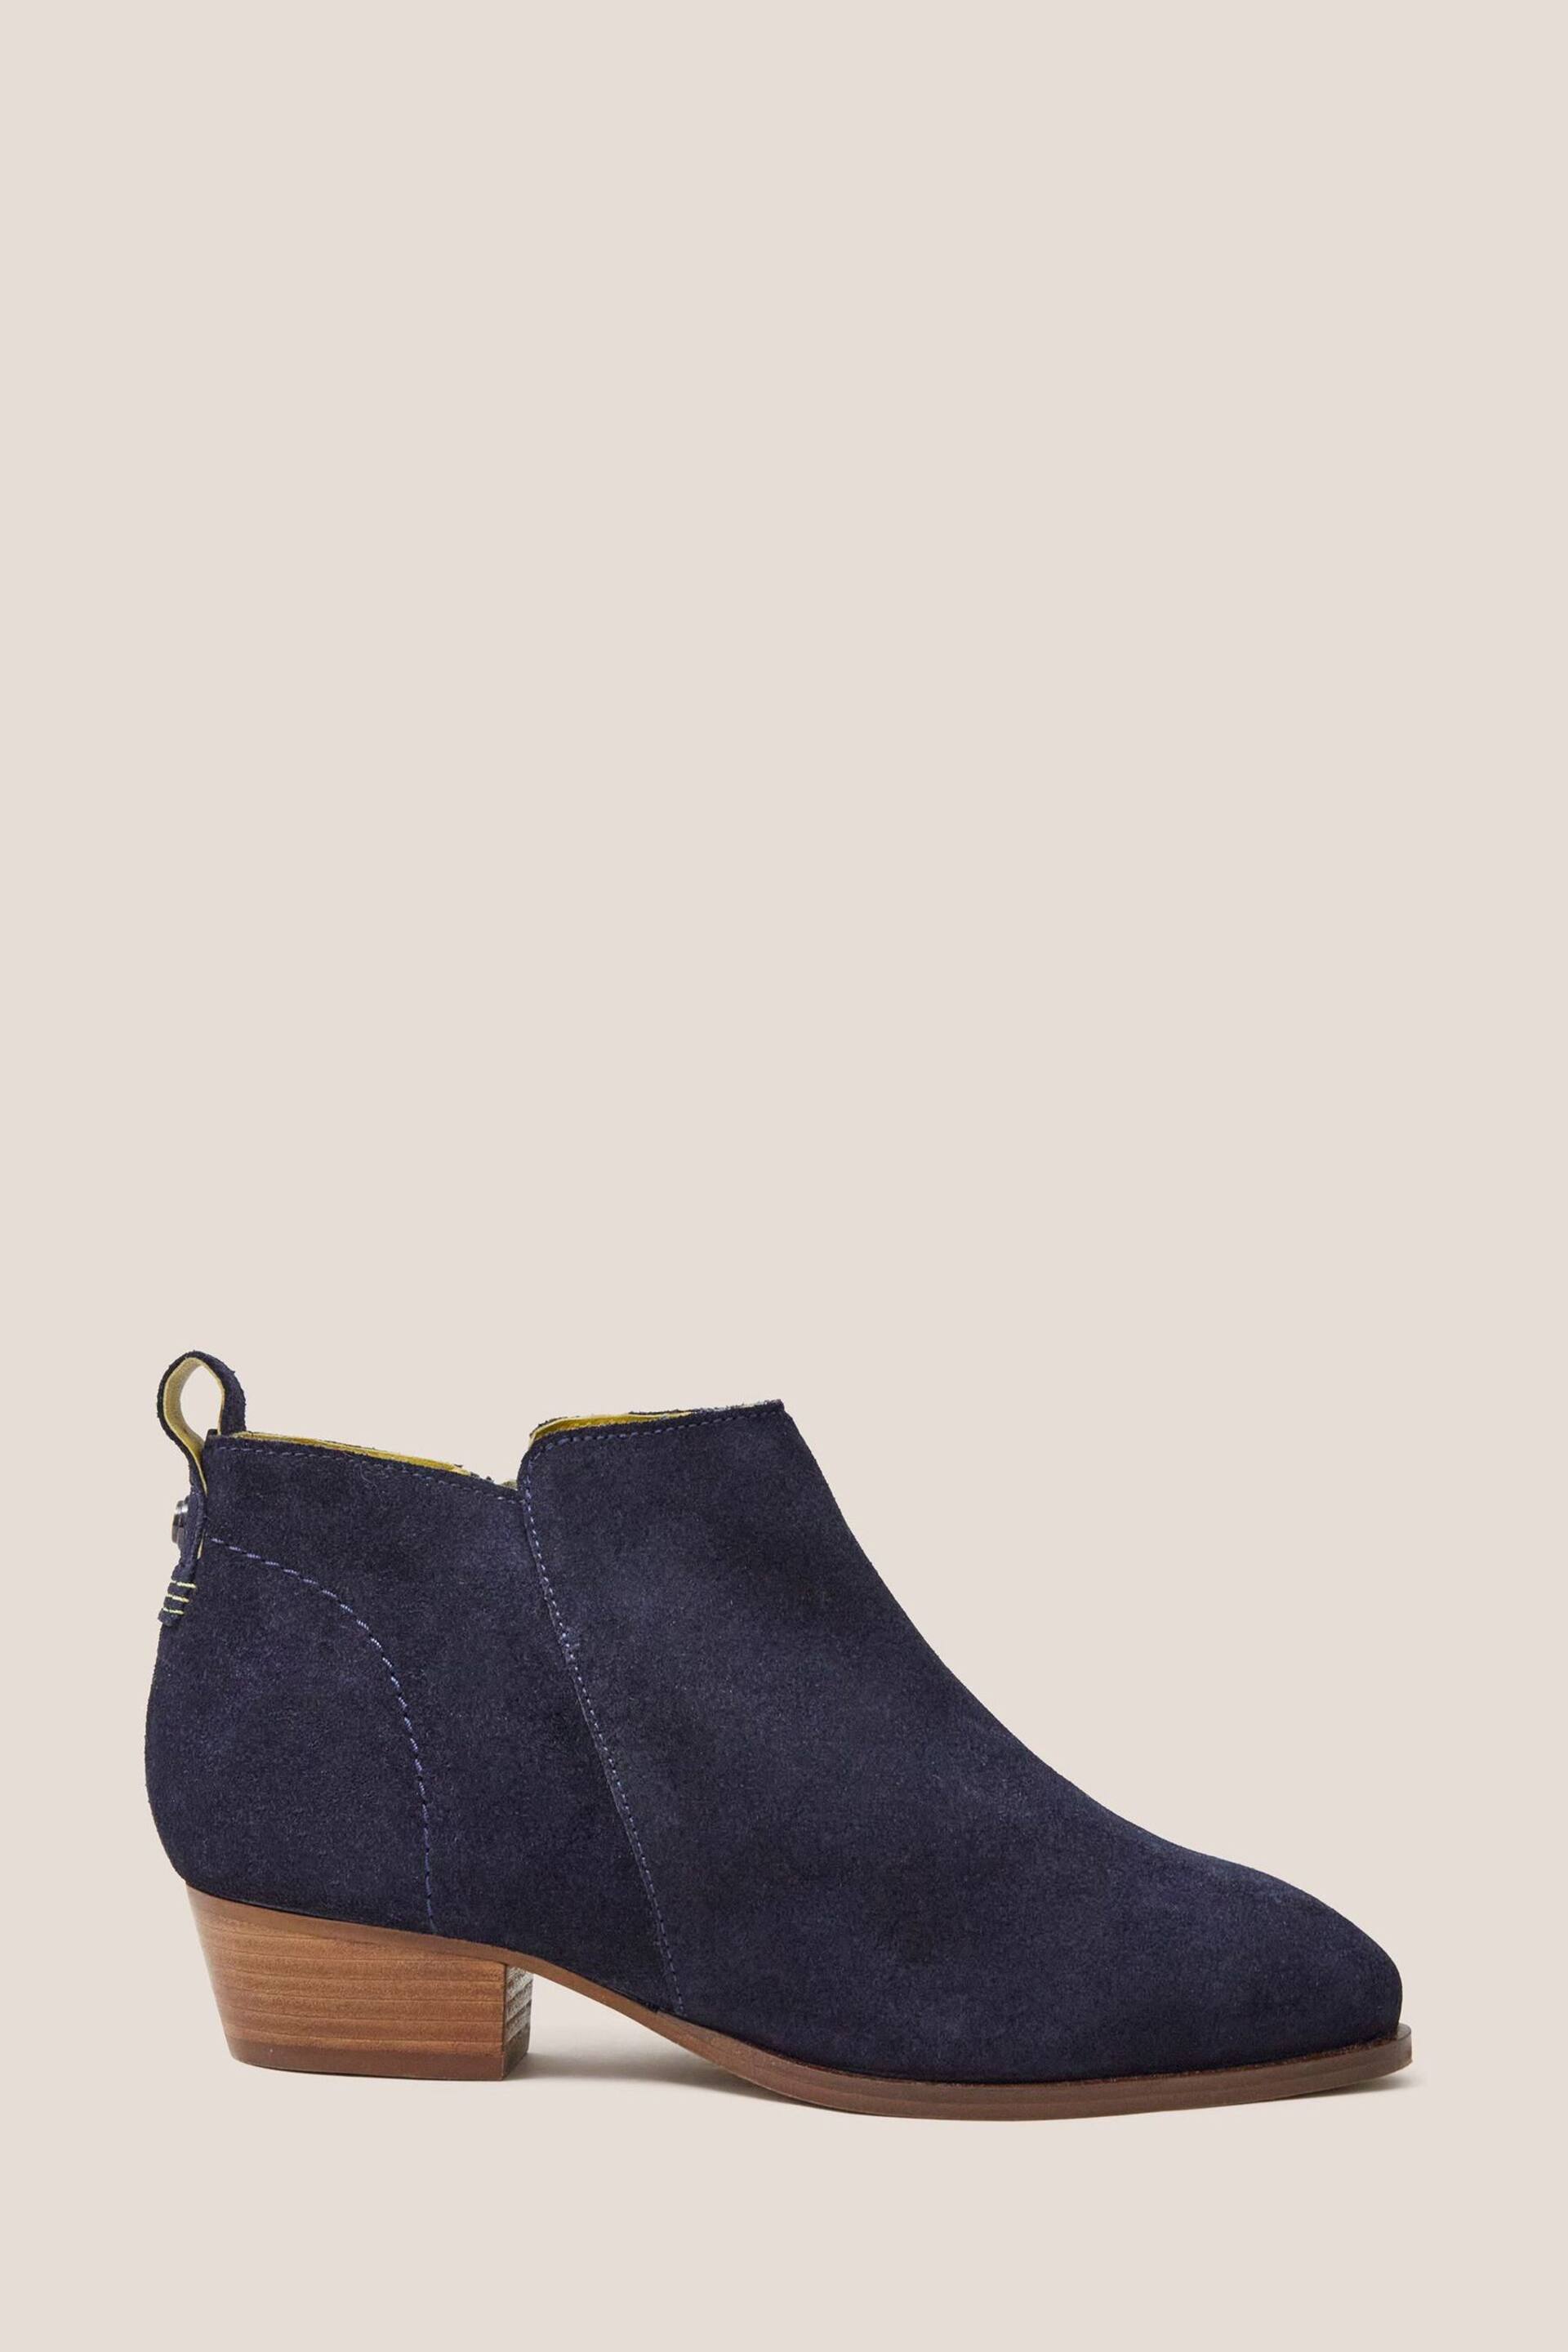 White Stuff Blue Wide Fit Suede Ankle Boots - Image 1 of 4